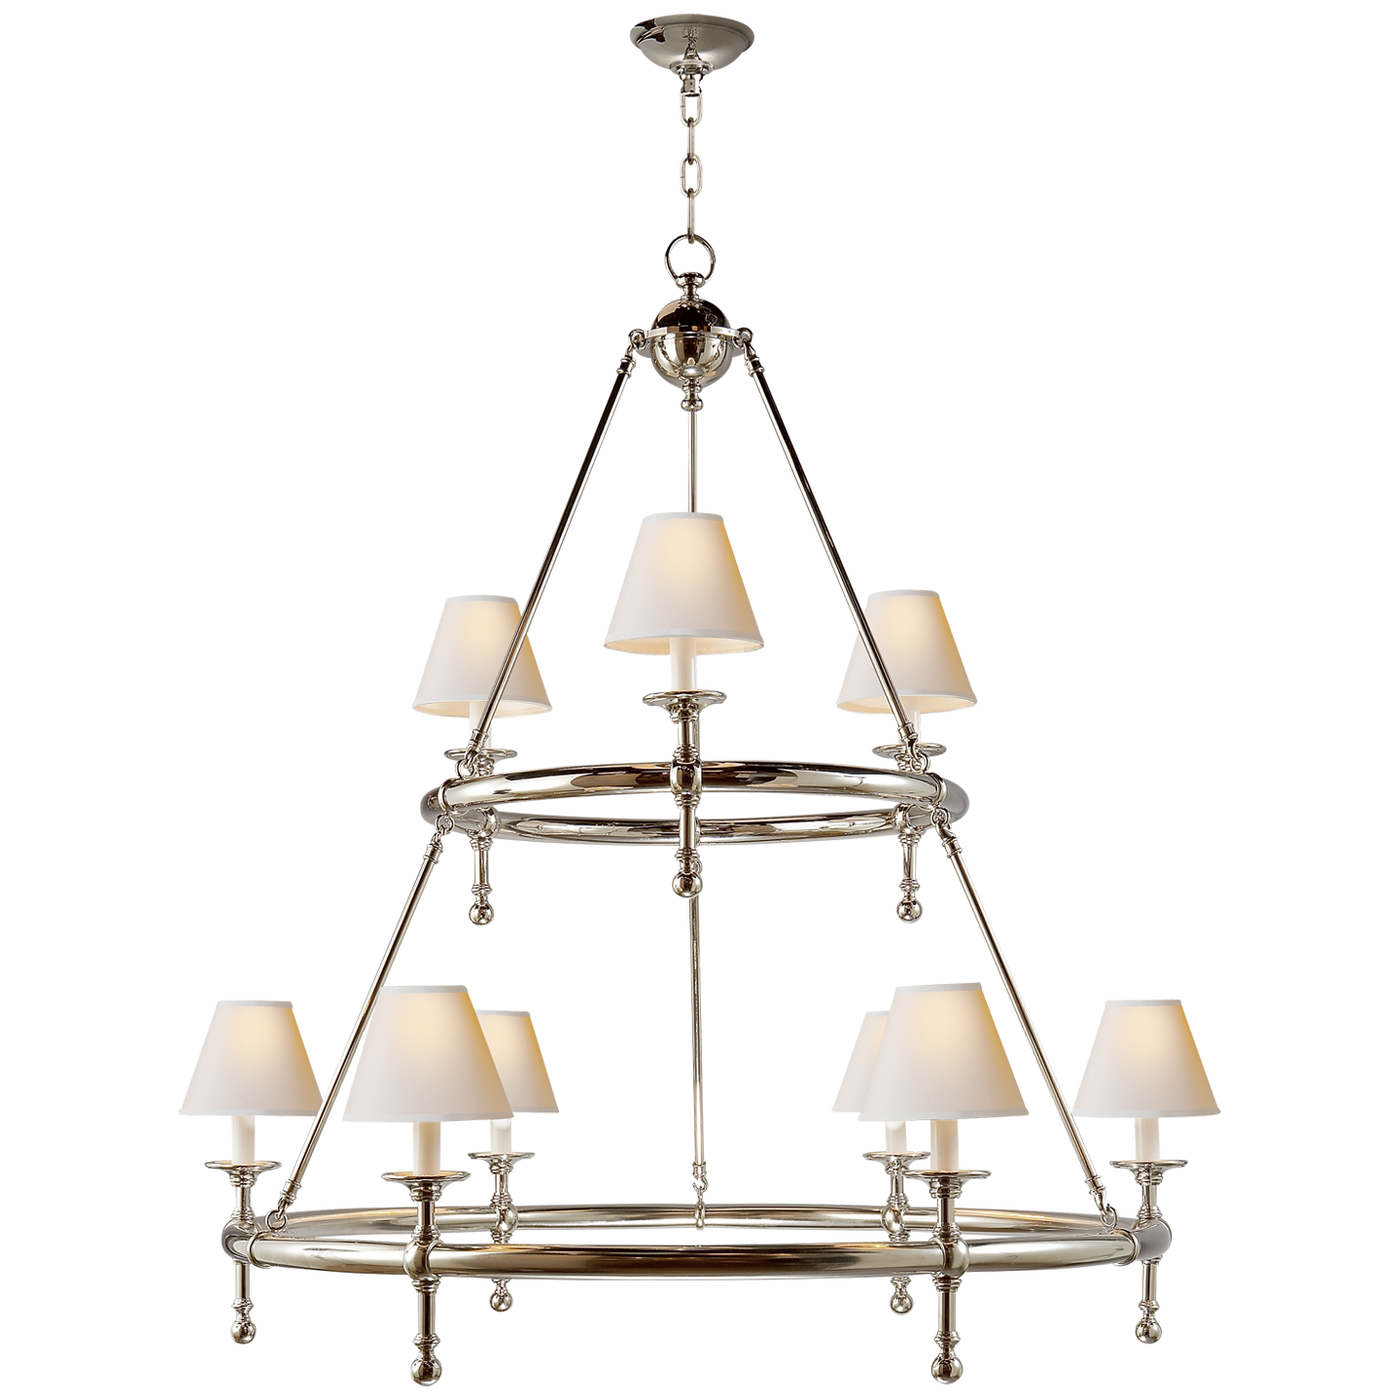 CHANDELIER 2-TIER RING POLISHED NICKEL